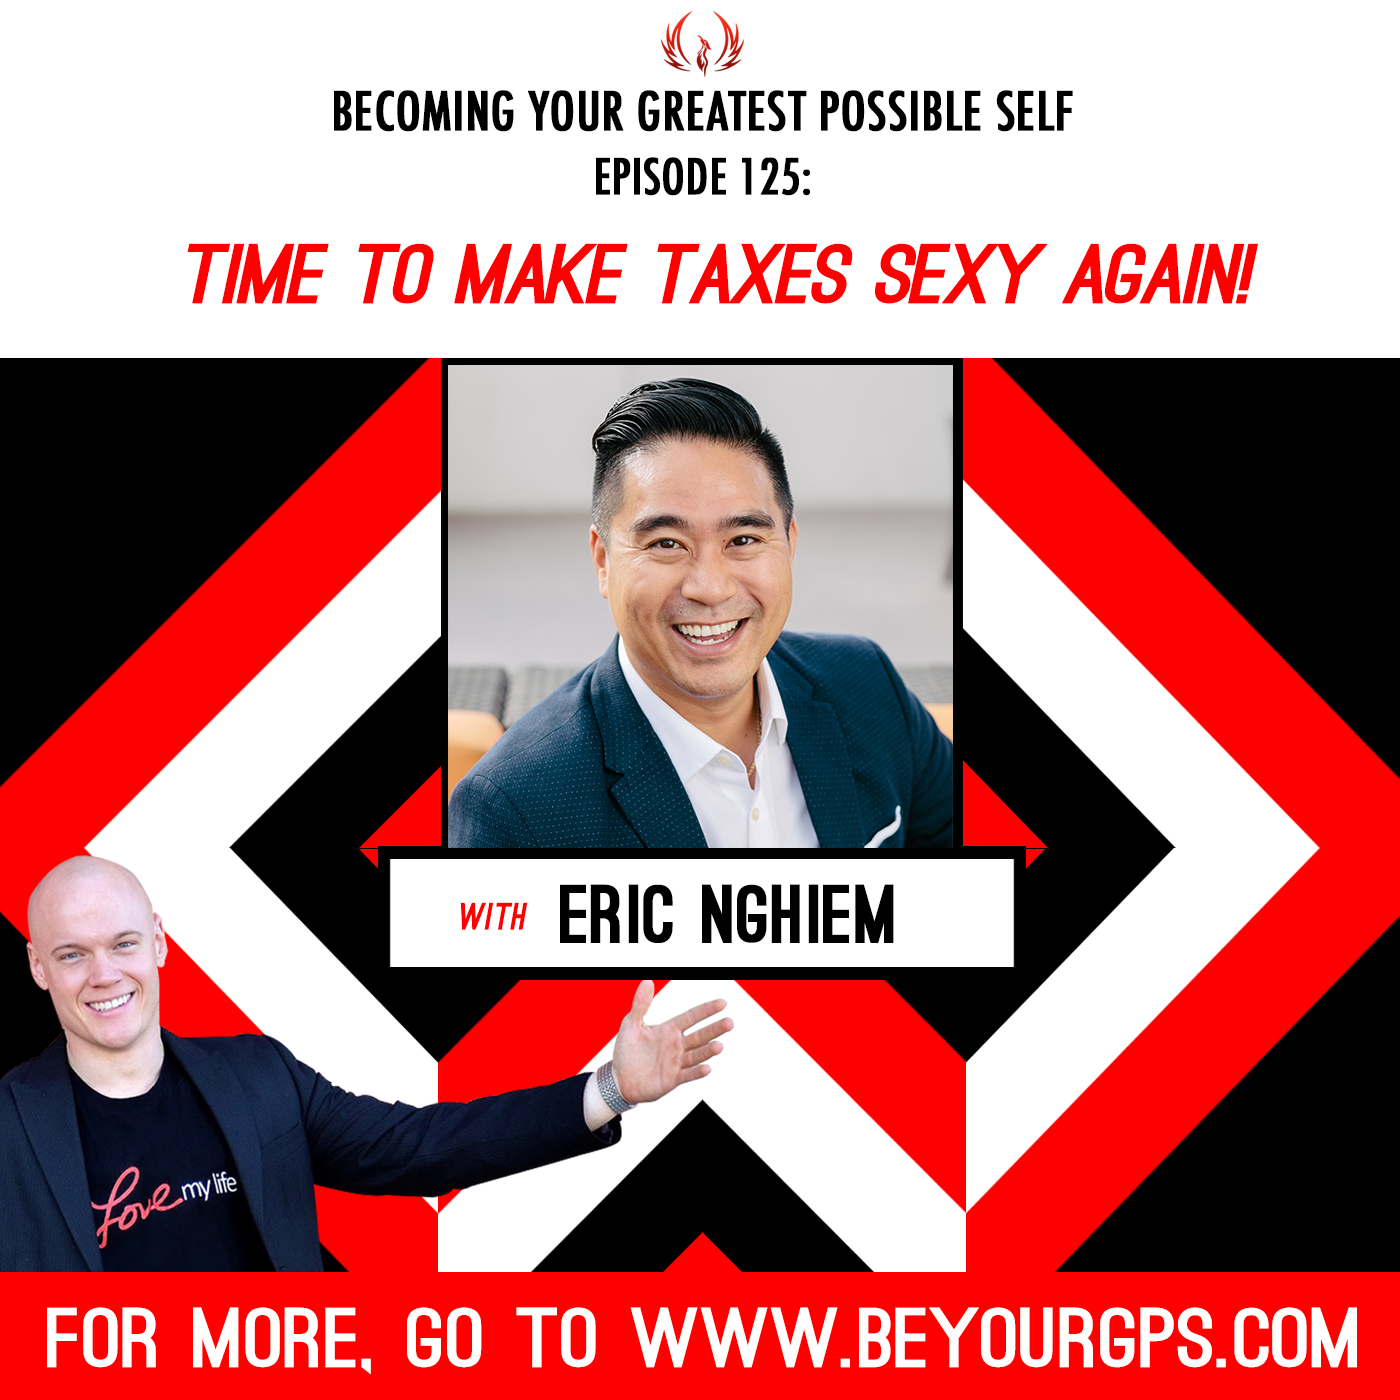 Time to Make Taxes Sexy Again! with Eric Nghiem